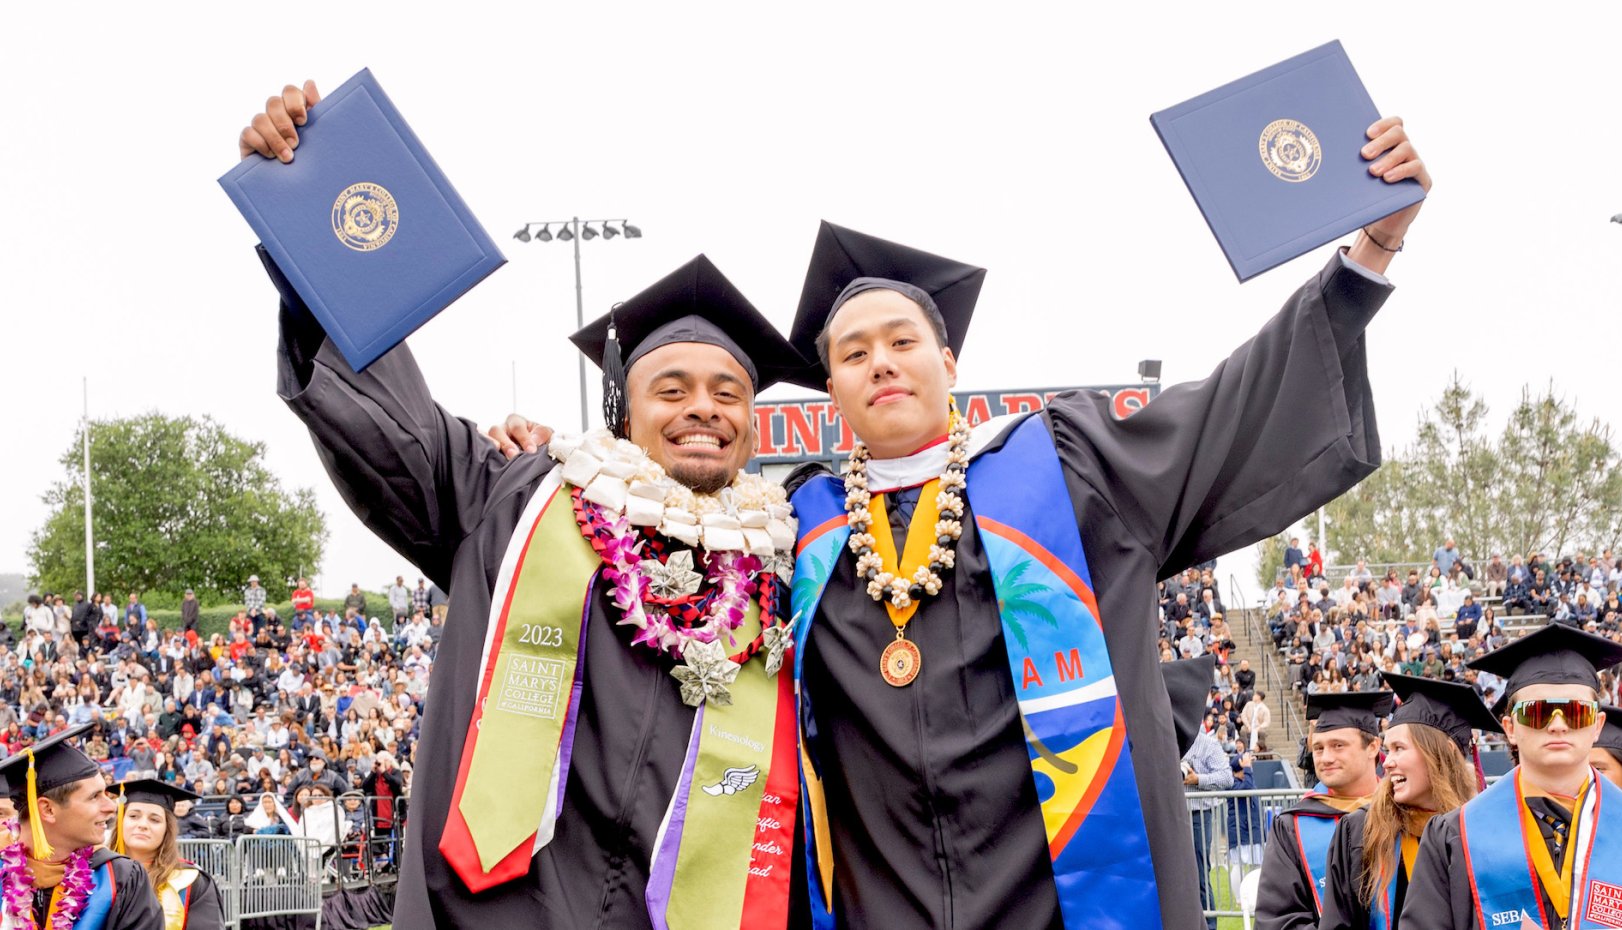 Two students raising their diplomas at 2023 Undergraduate Commencement